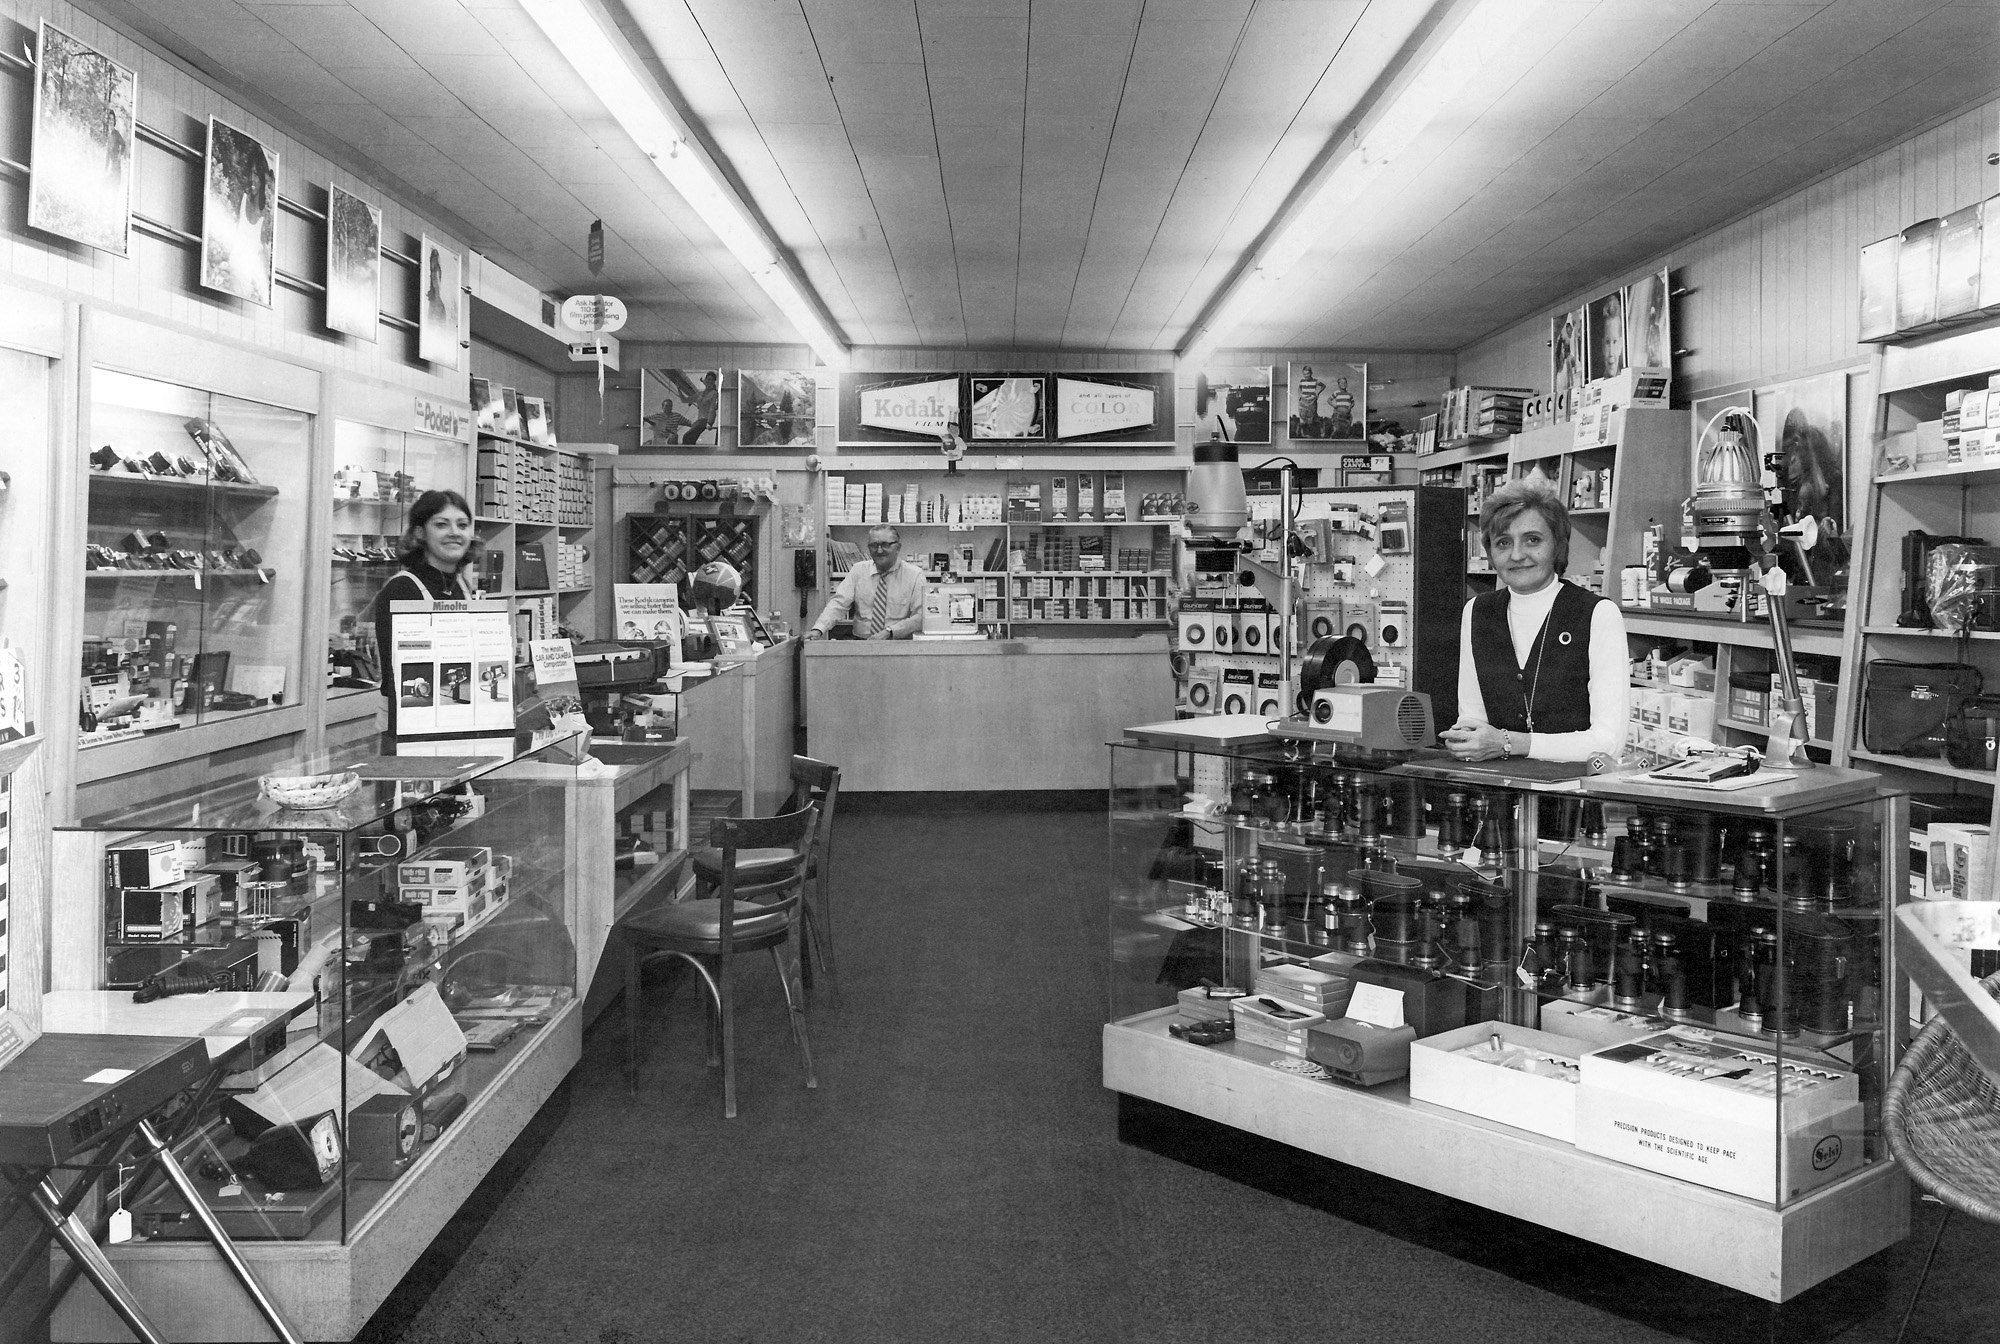 The Wayne Camera Center circa 1970s in the Preakness Shopping Center, Wayne, NJ.  I believe that's the founder, Bill Orkulsky, who started the store in 1955.  Not sure if the ladies present are his wife and daughter or just employees.  Lots of future "collectibles" and "kitsch" for sale. View full size.